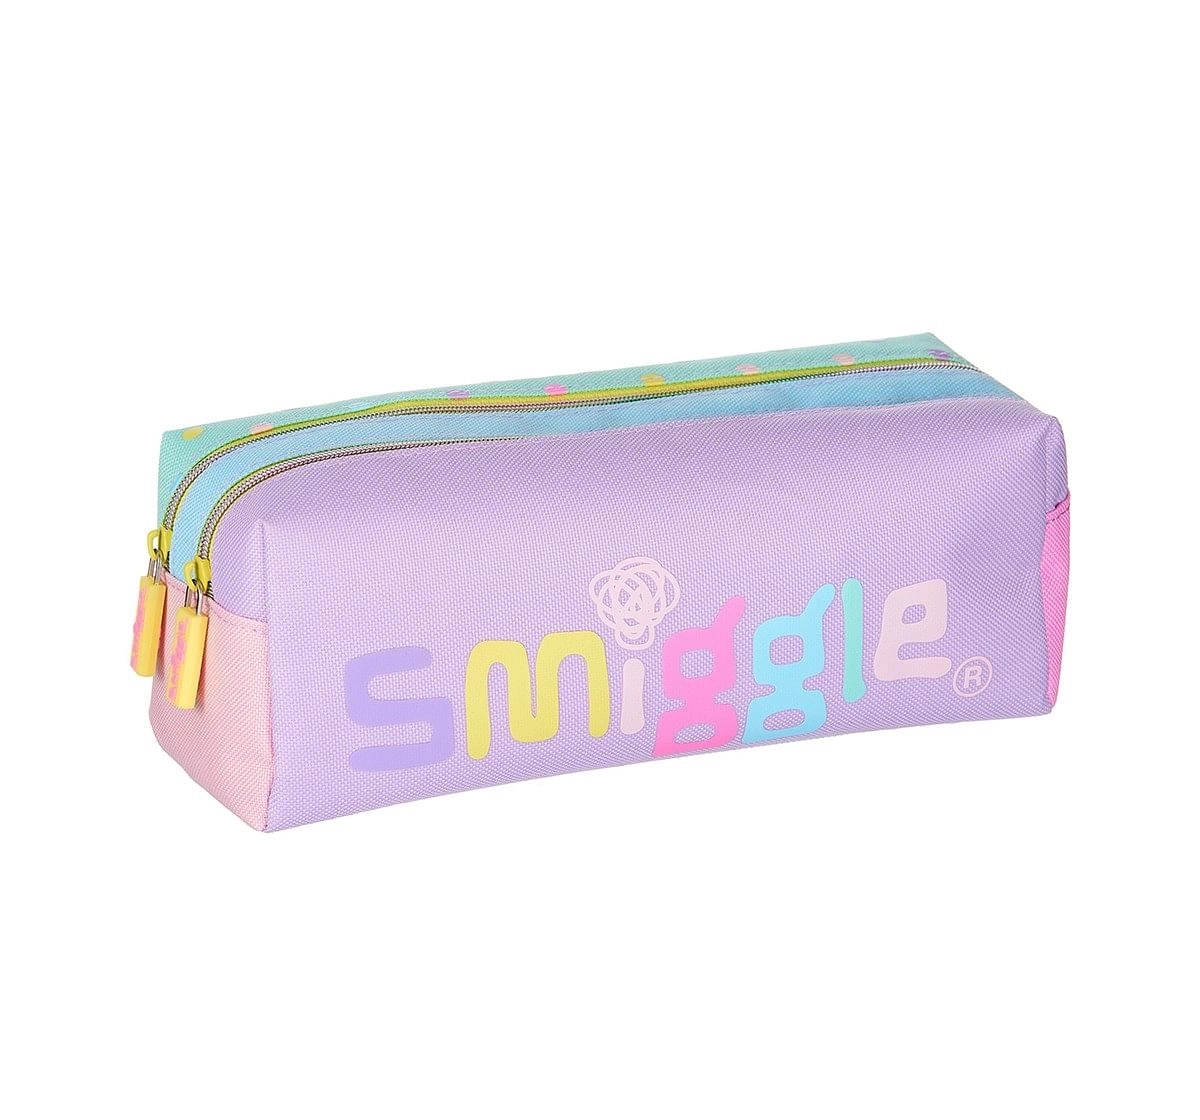  Smiggle Block Pencil Case with Two Zipped Compartments -Print Bags for Kids age 3Y+ (Pastel)